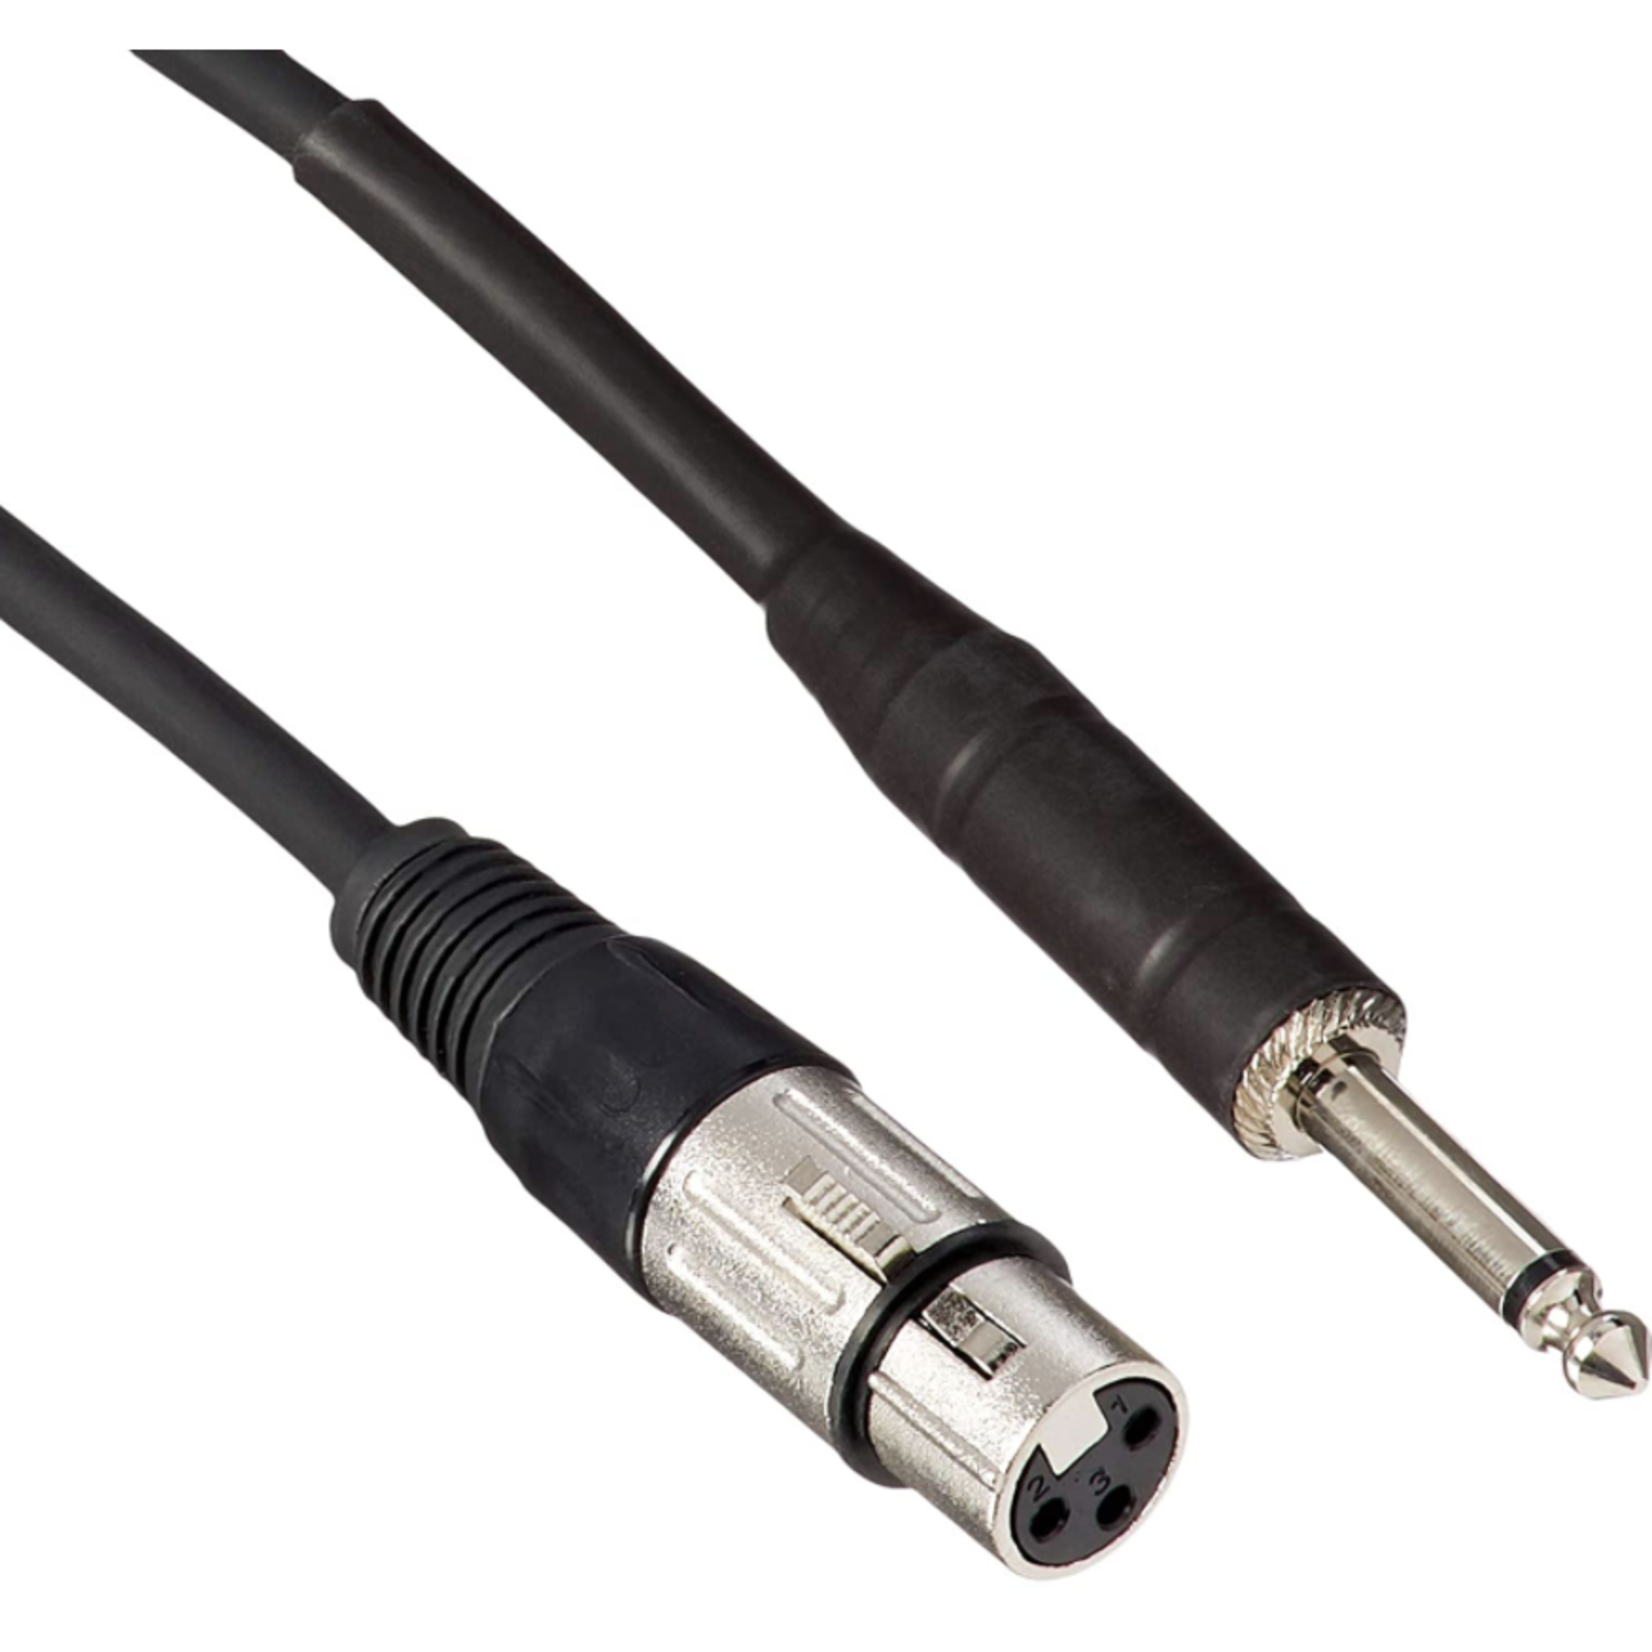 Chromacast ChromaCast Pro Series 10-Foot Mic Cable , Black, 1/4' Male to XLR Female Ends